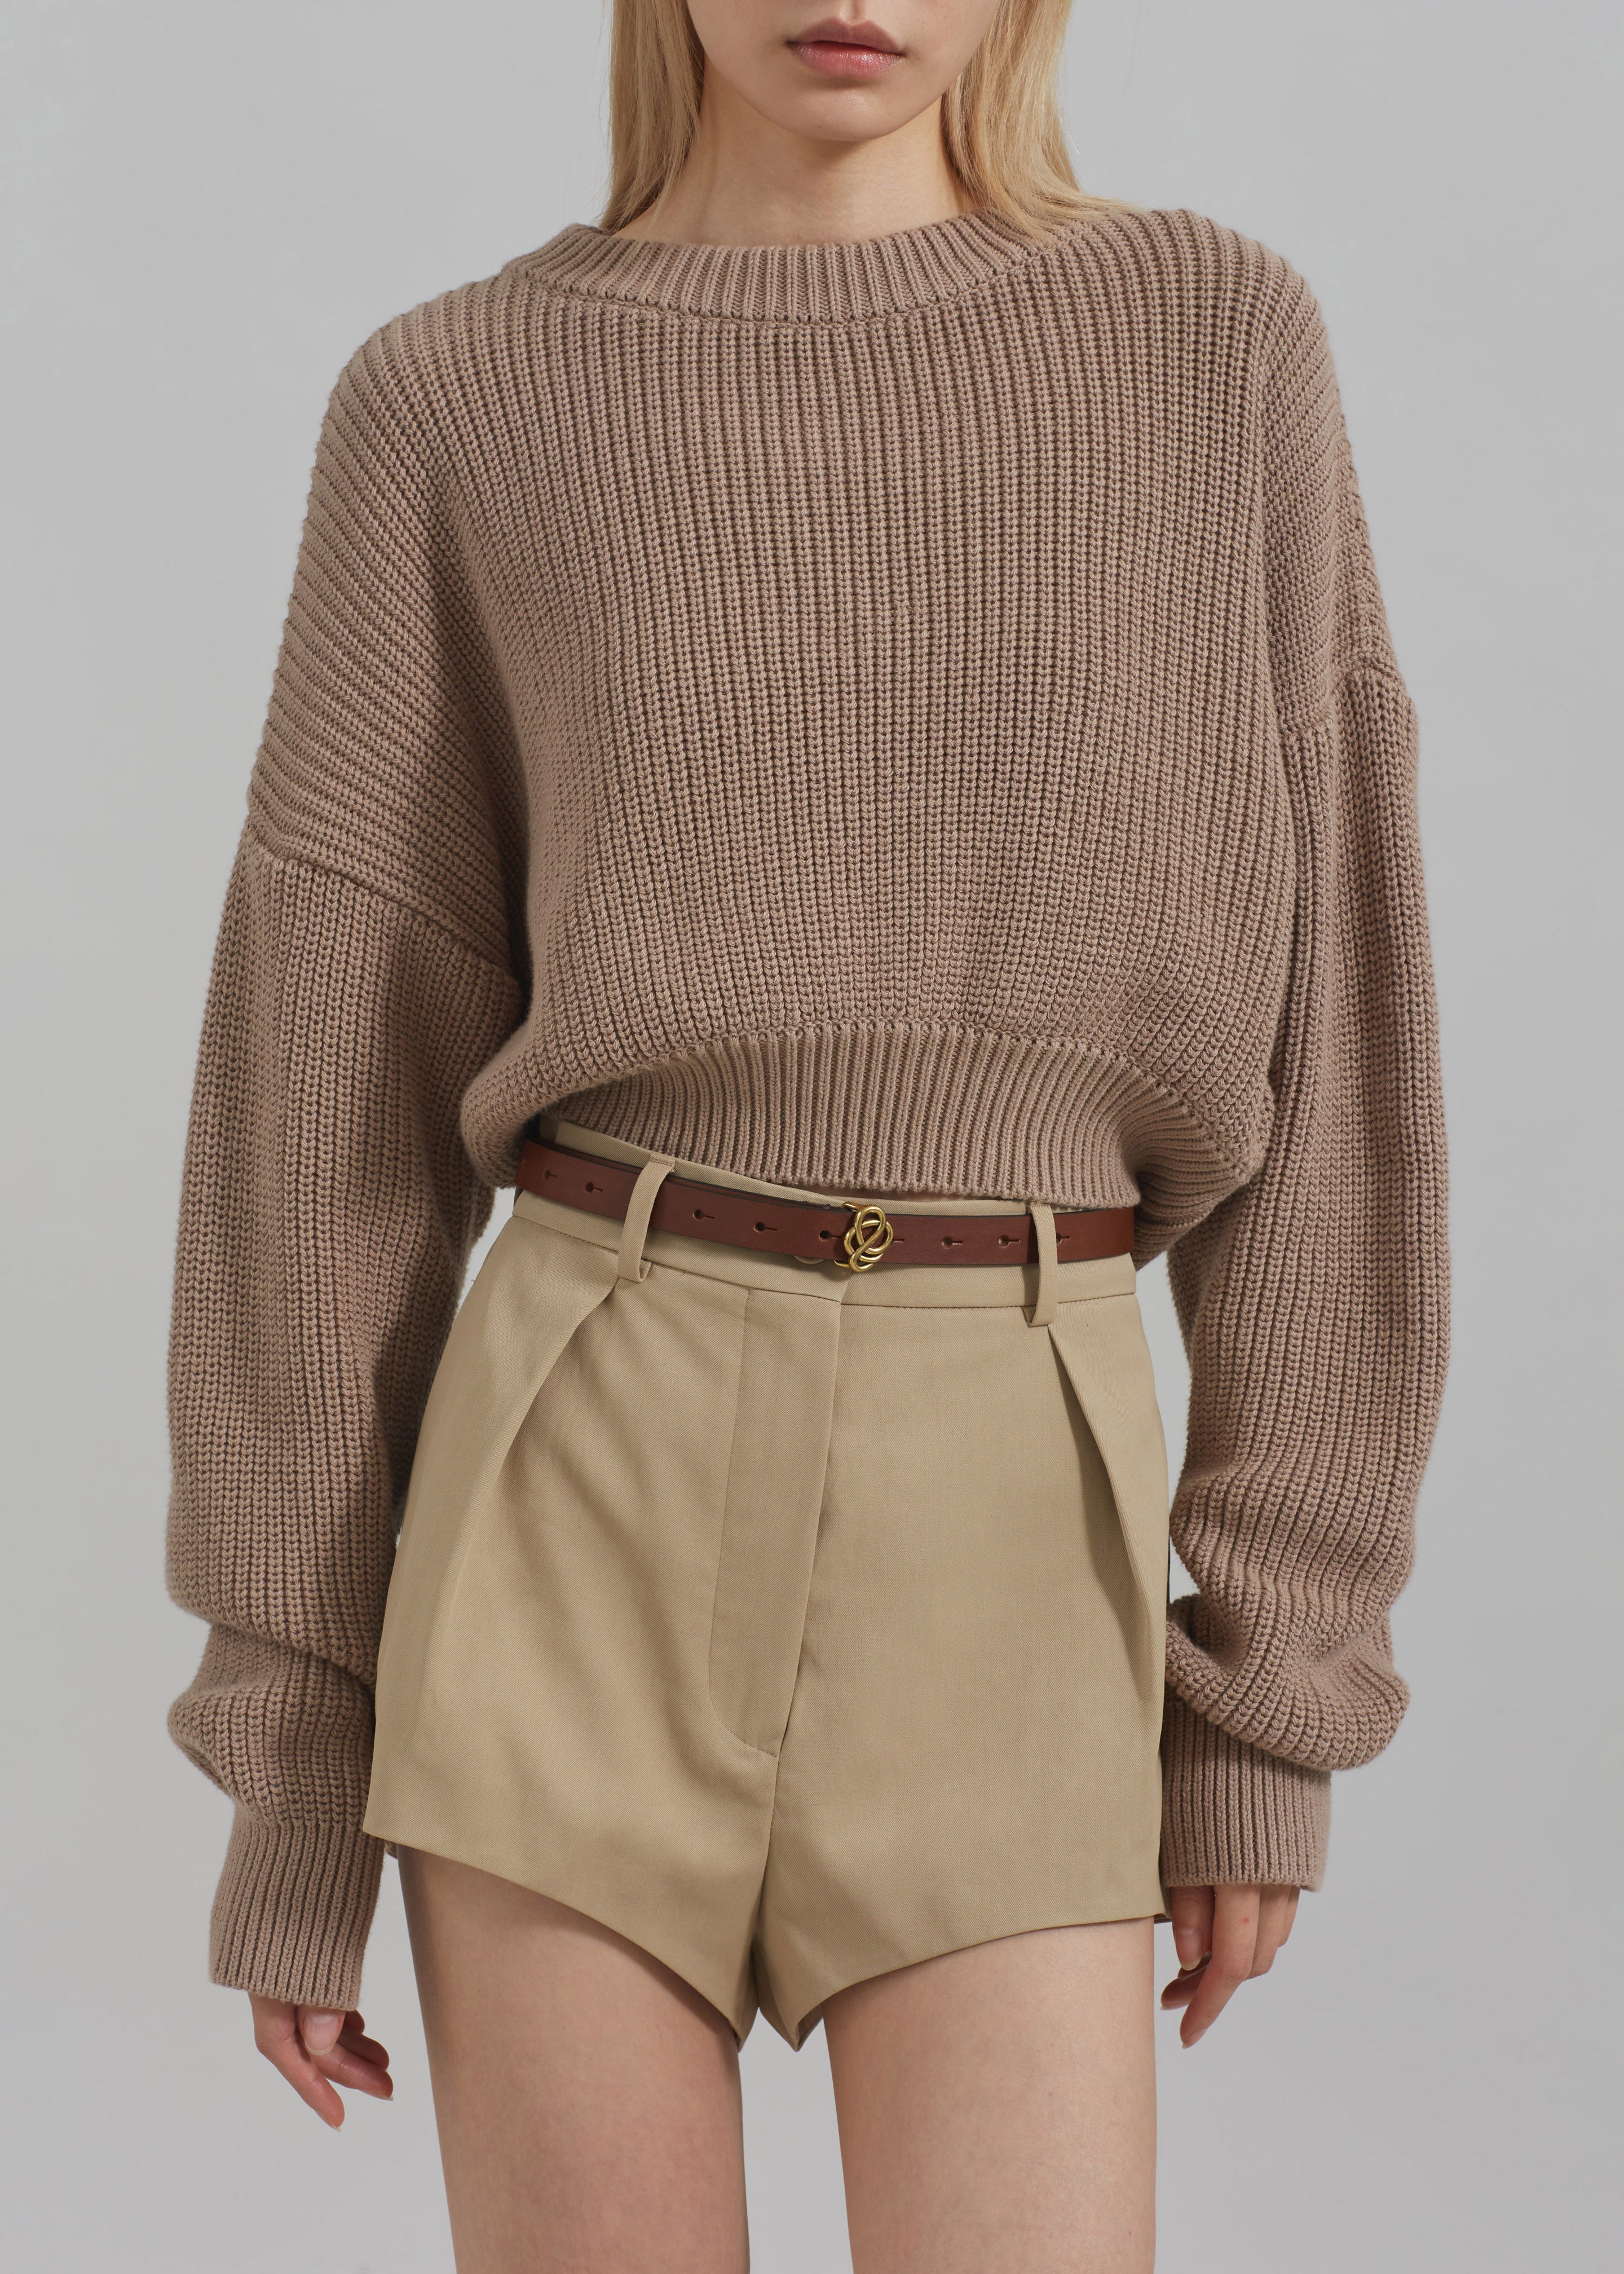 Teague Cropped Sweater - Beige - 3